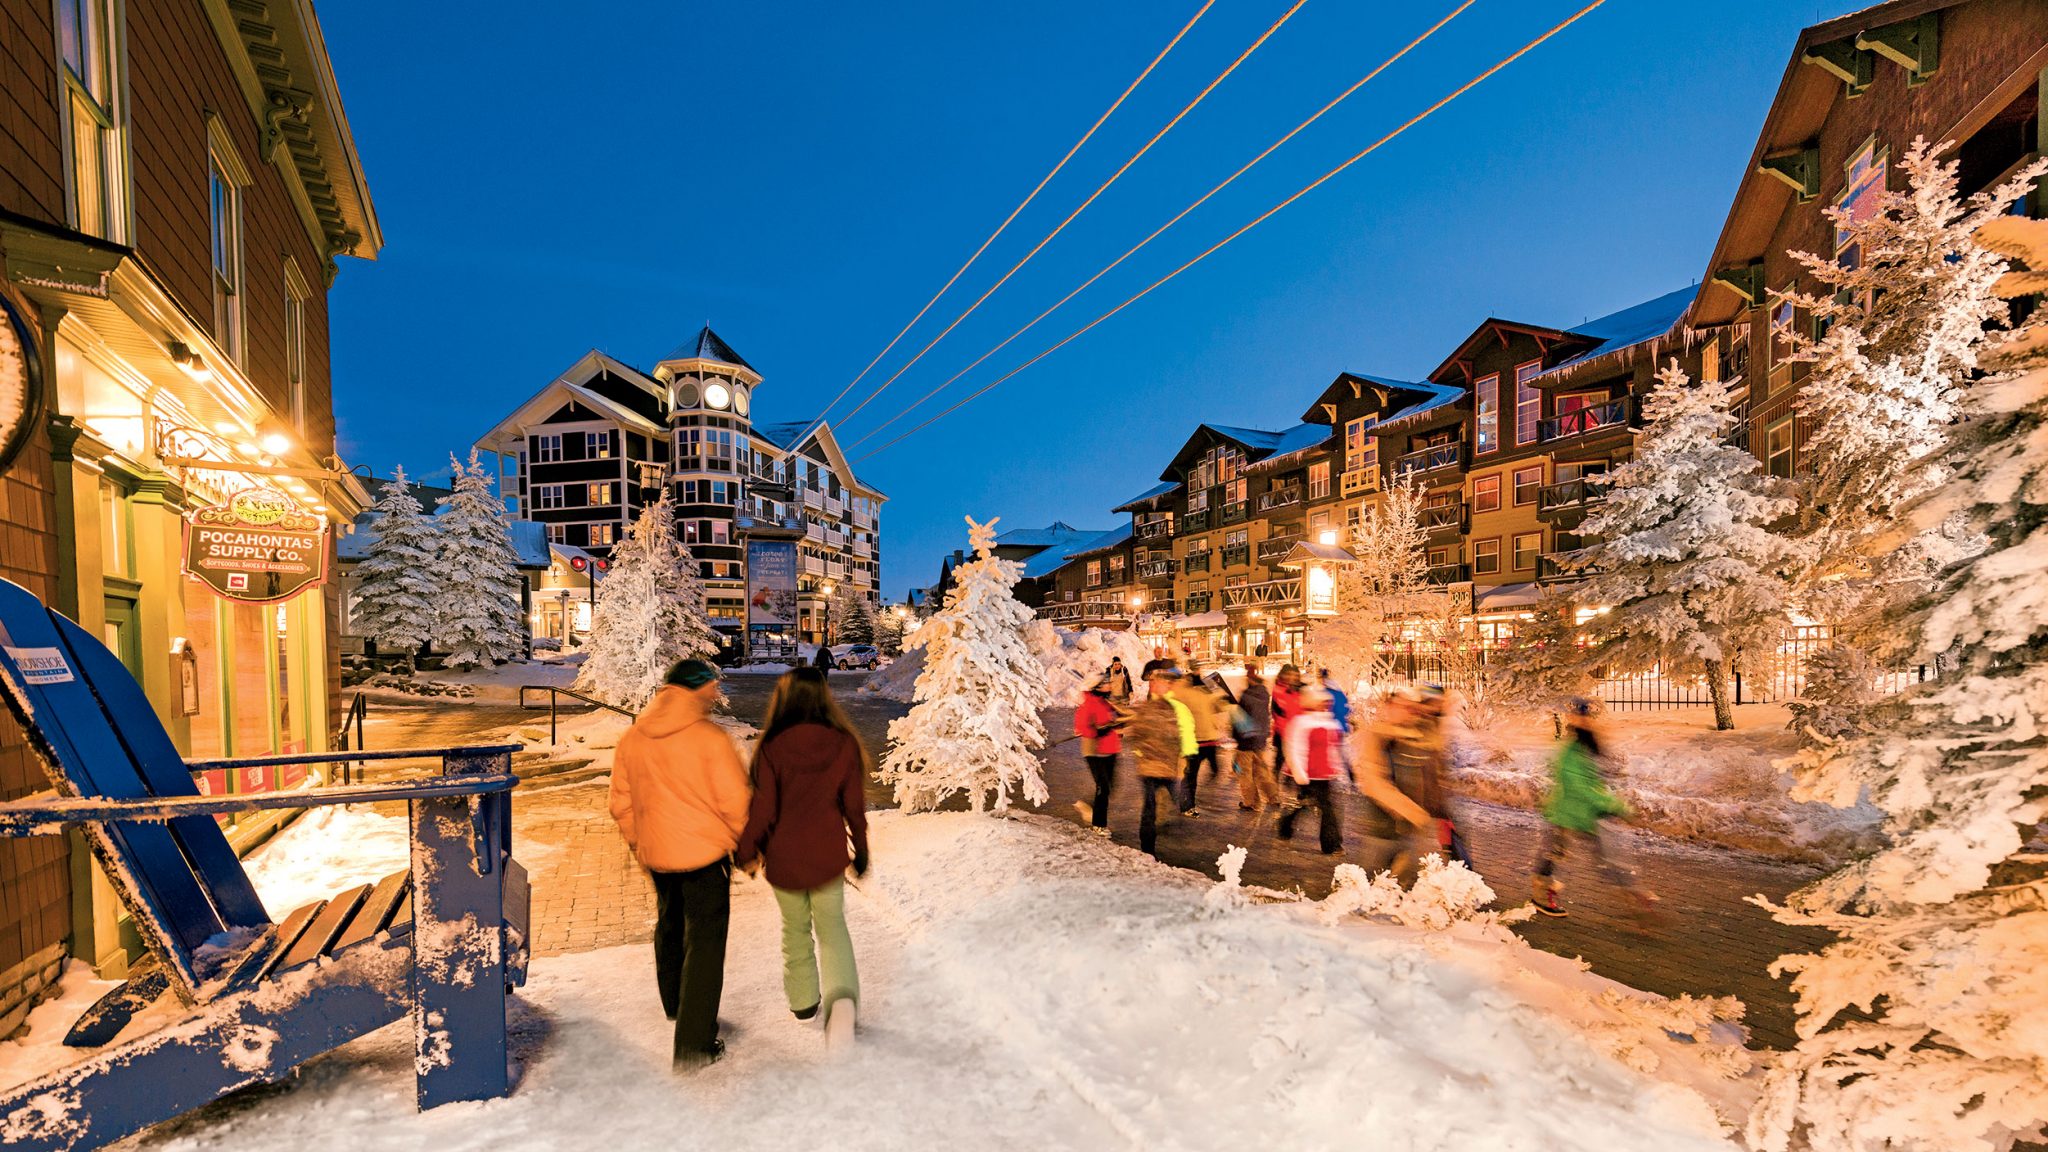 How to Spend a Weekend at Snowshoe | Washingtonian (DC)